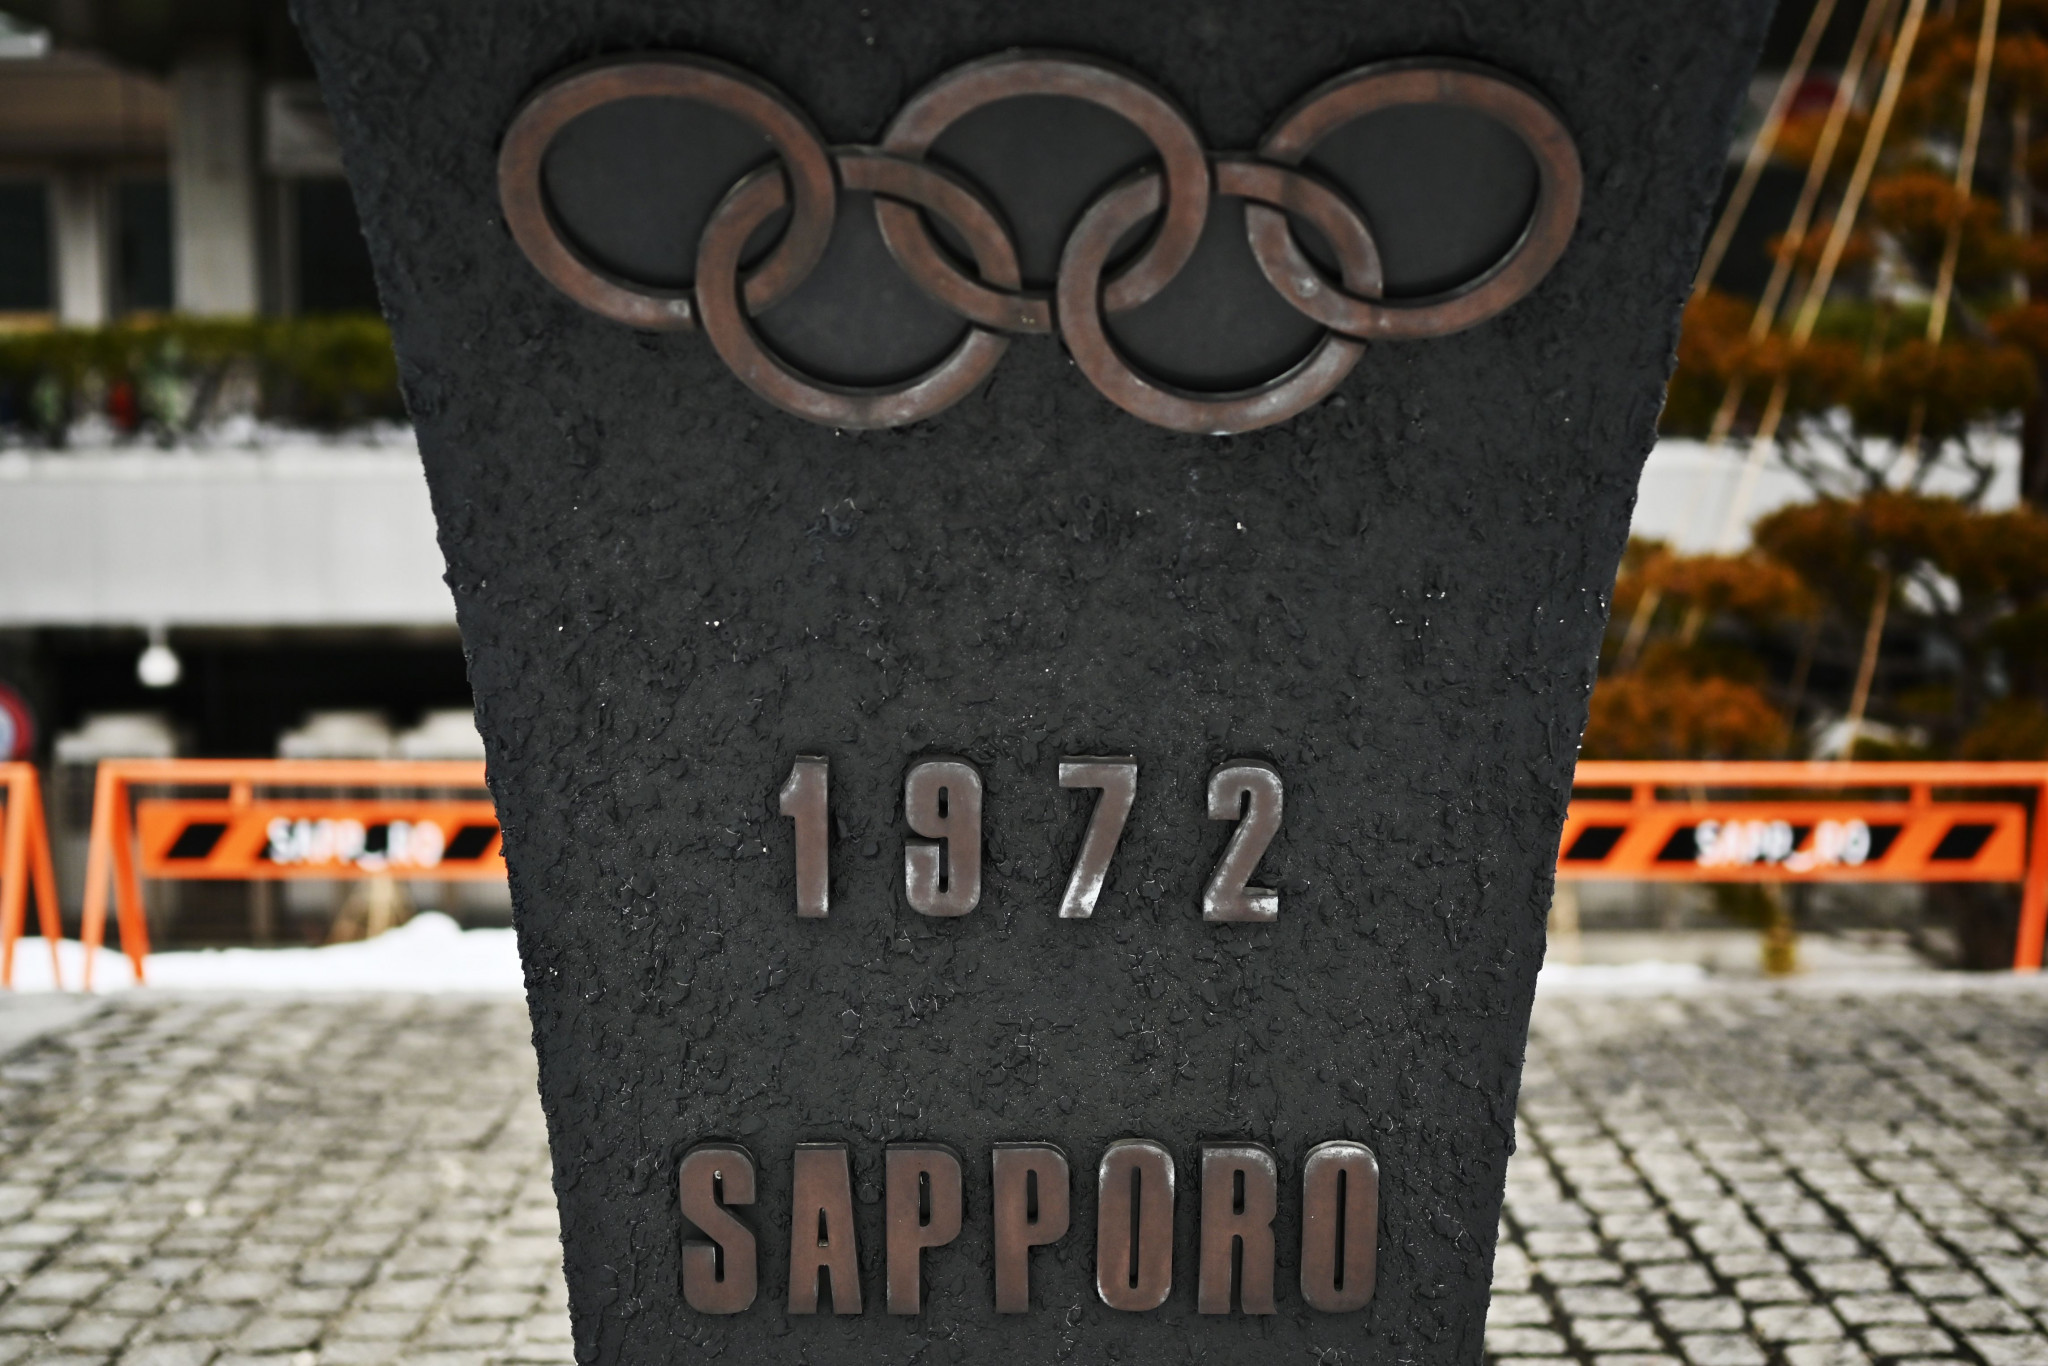 Sapporo has previously hosted the Winter Olympics in 1972 ©Getty Images